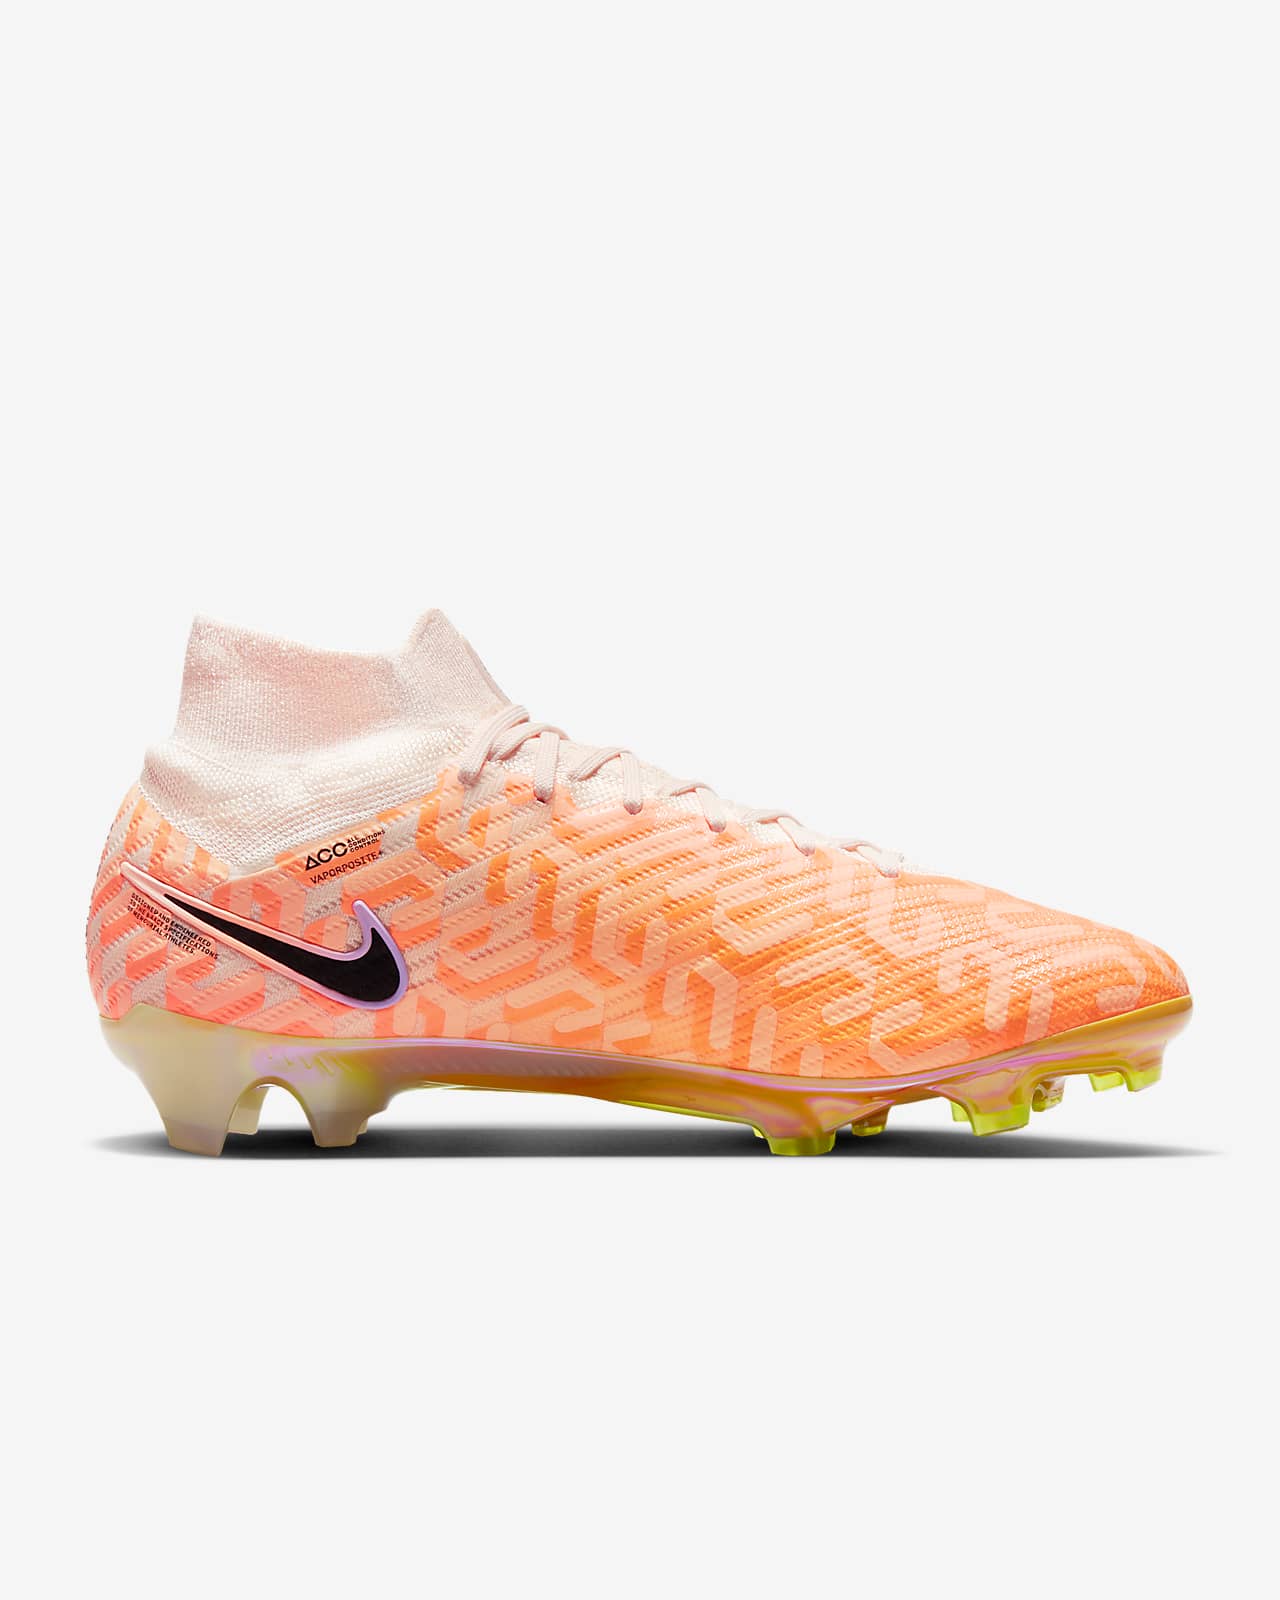 Madison Executie Graden Celsius Nike Mercurial Superfly 9 Elite Firm-Ground Soccer Cleats. Nike JP